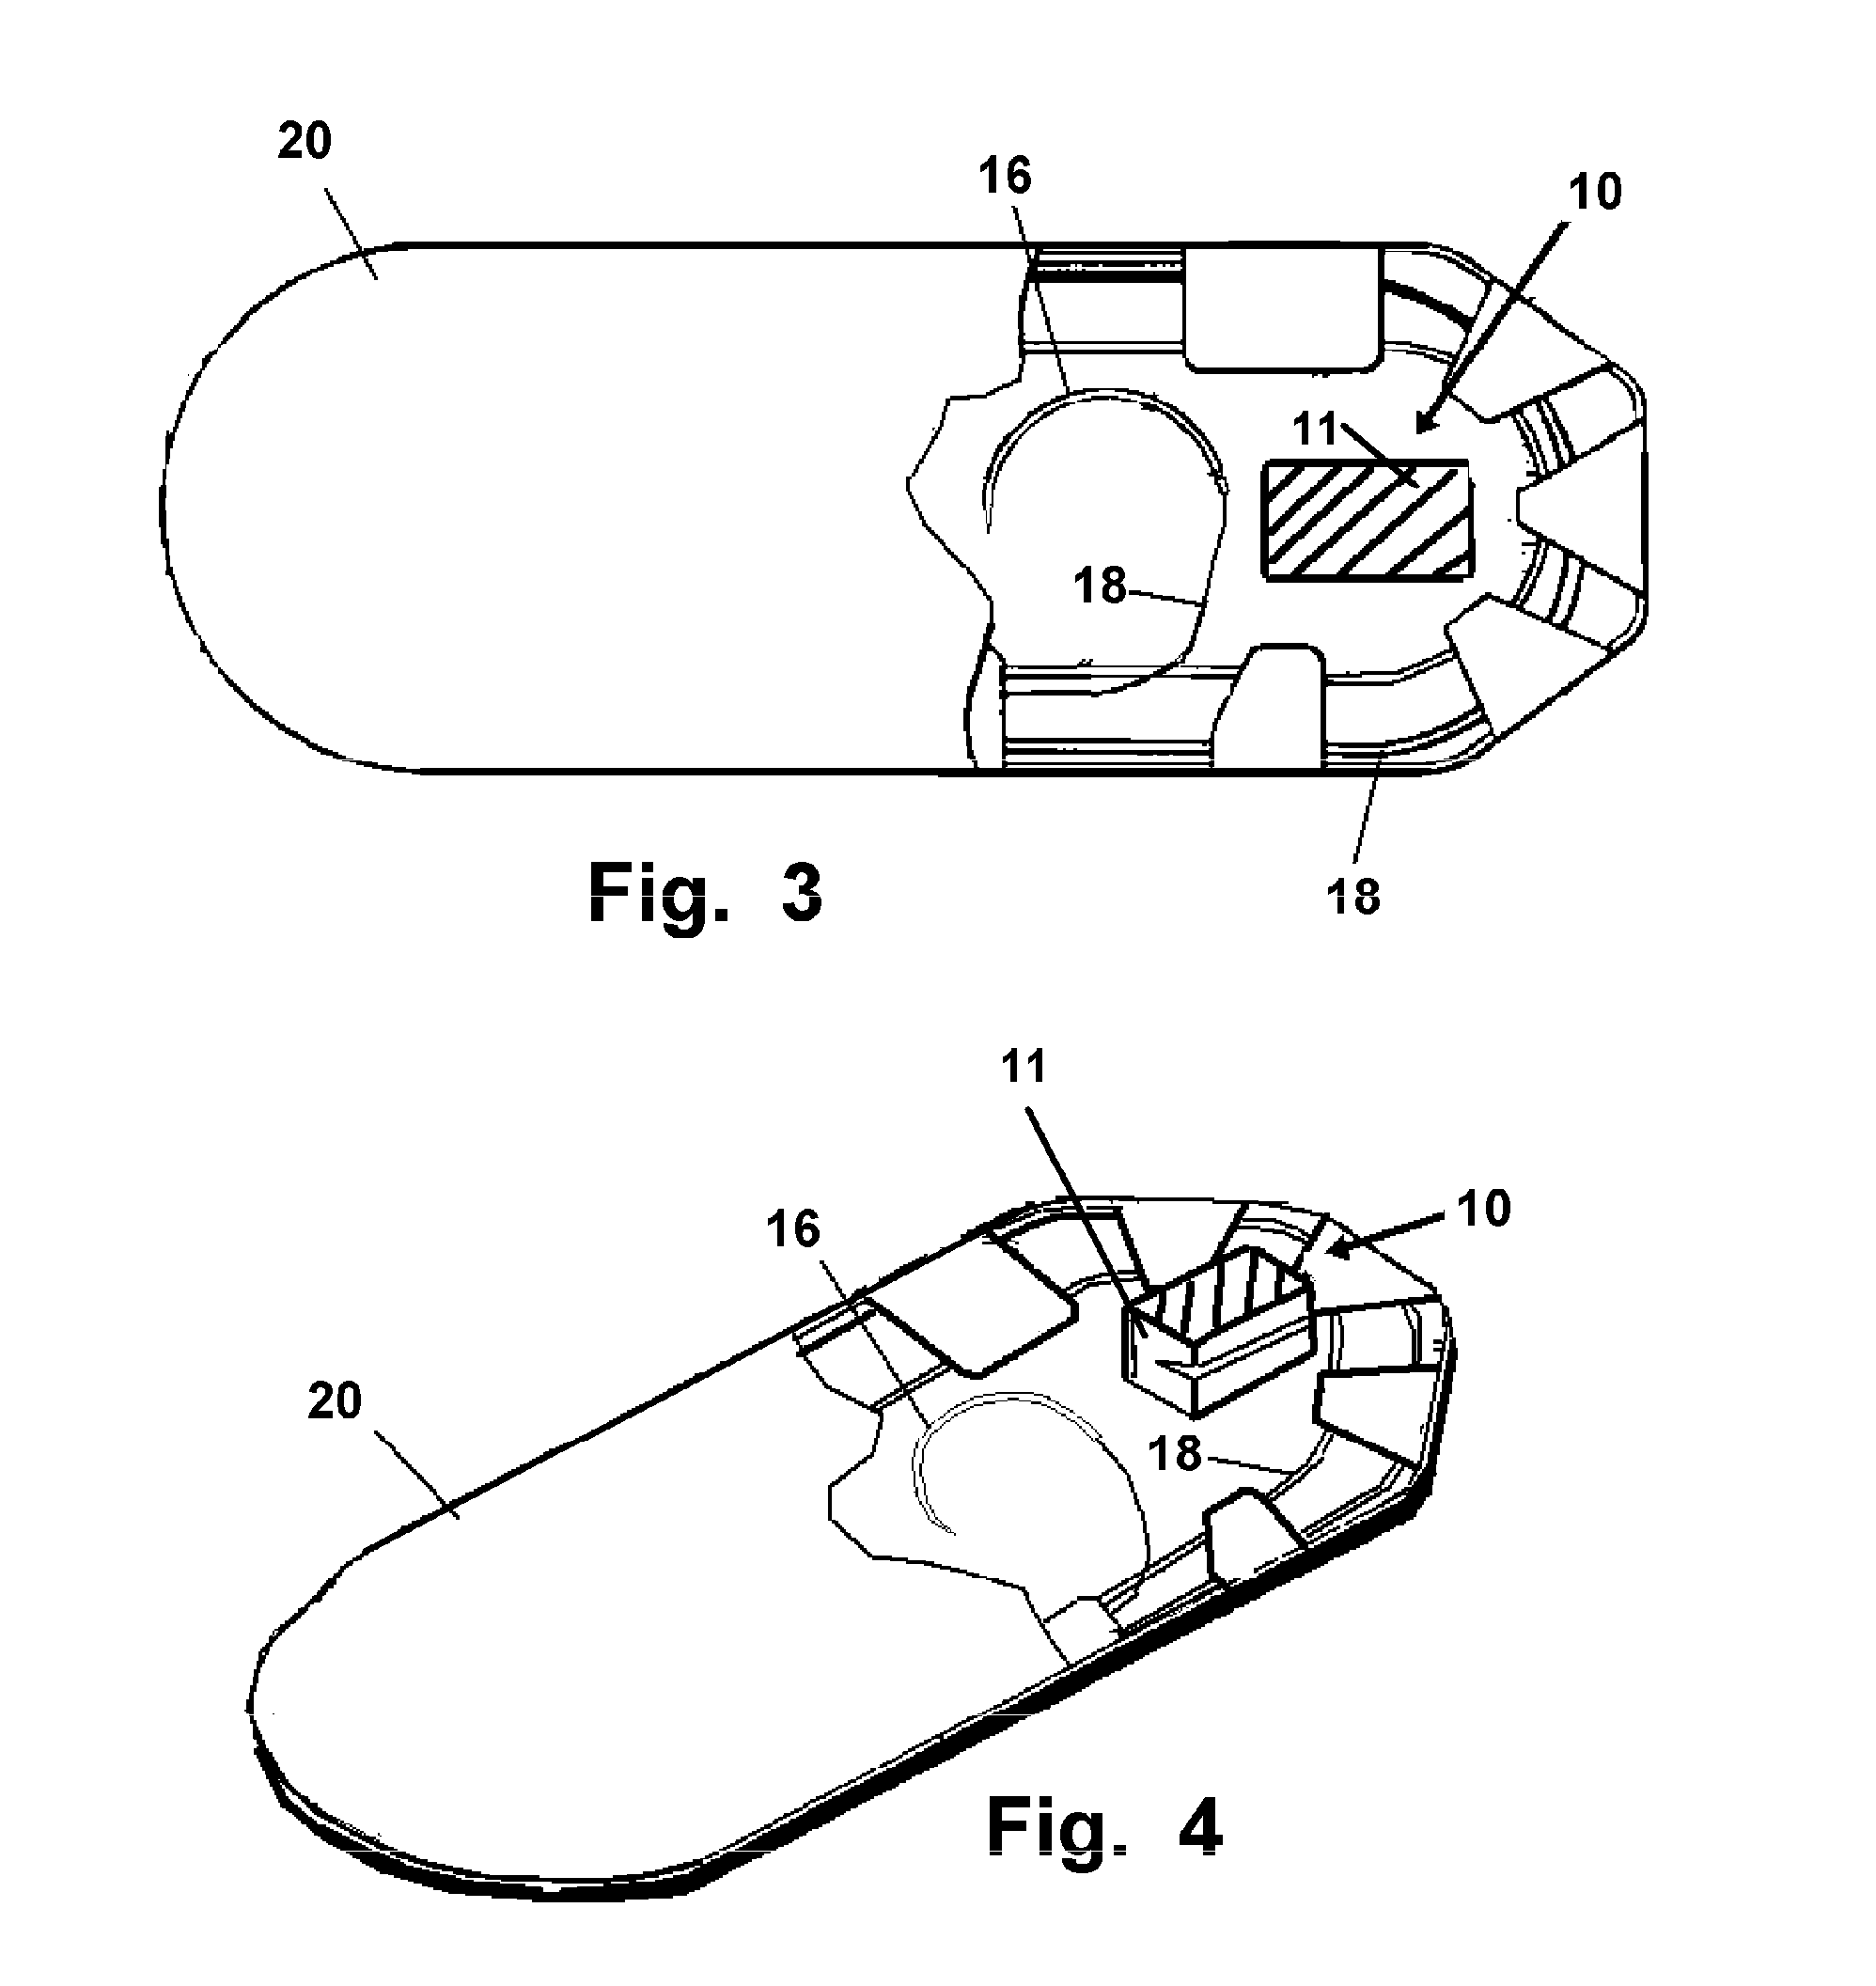 Suture Straightening Device and Method